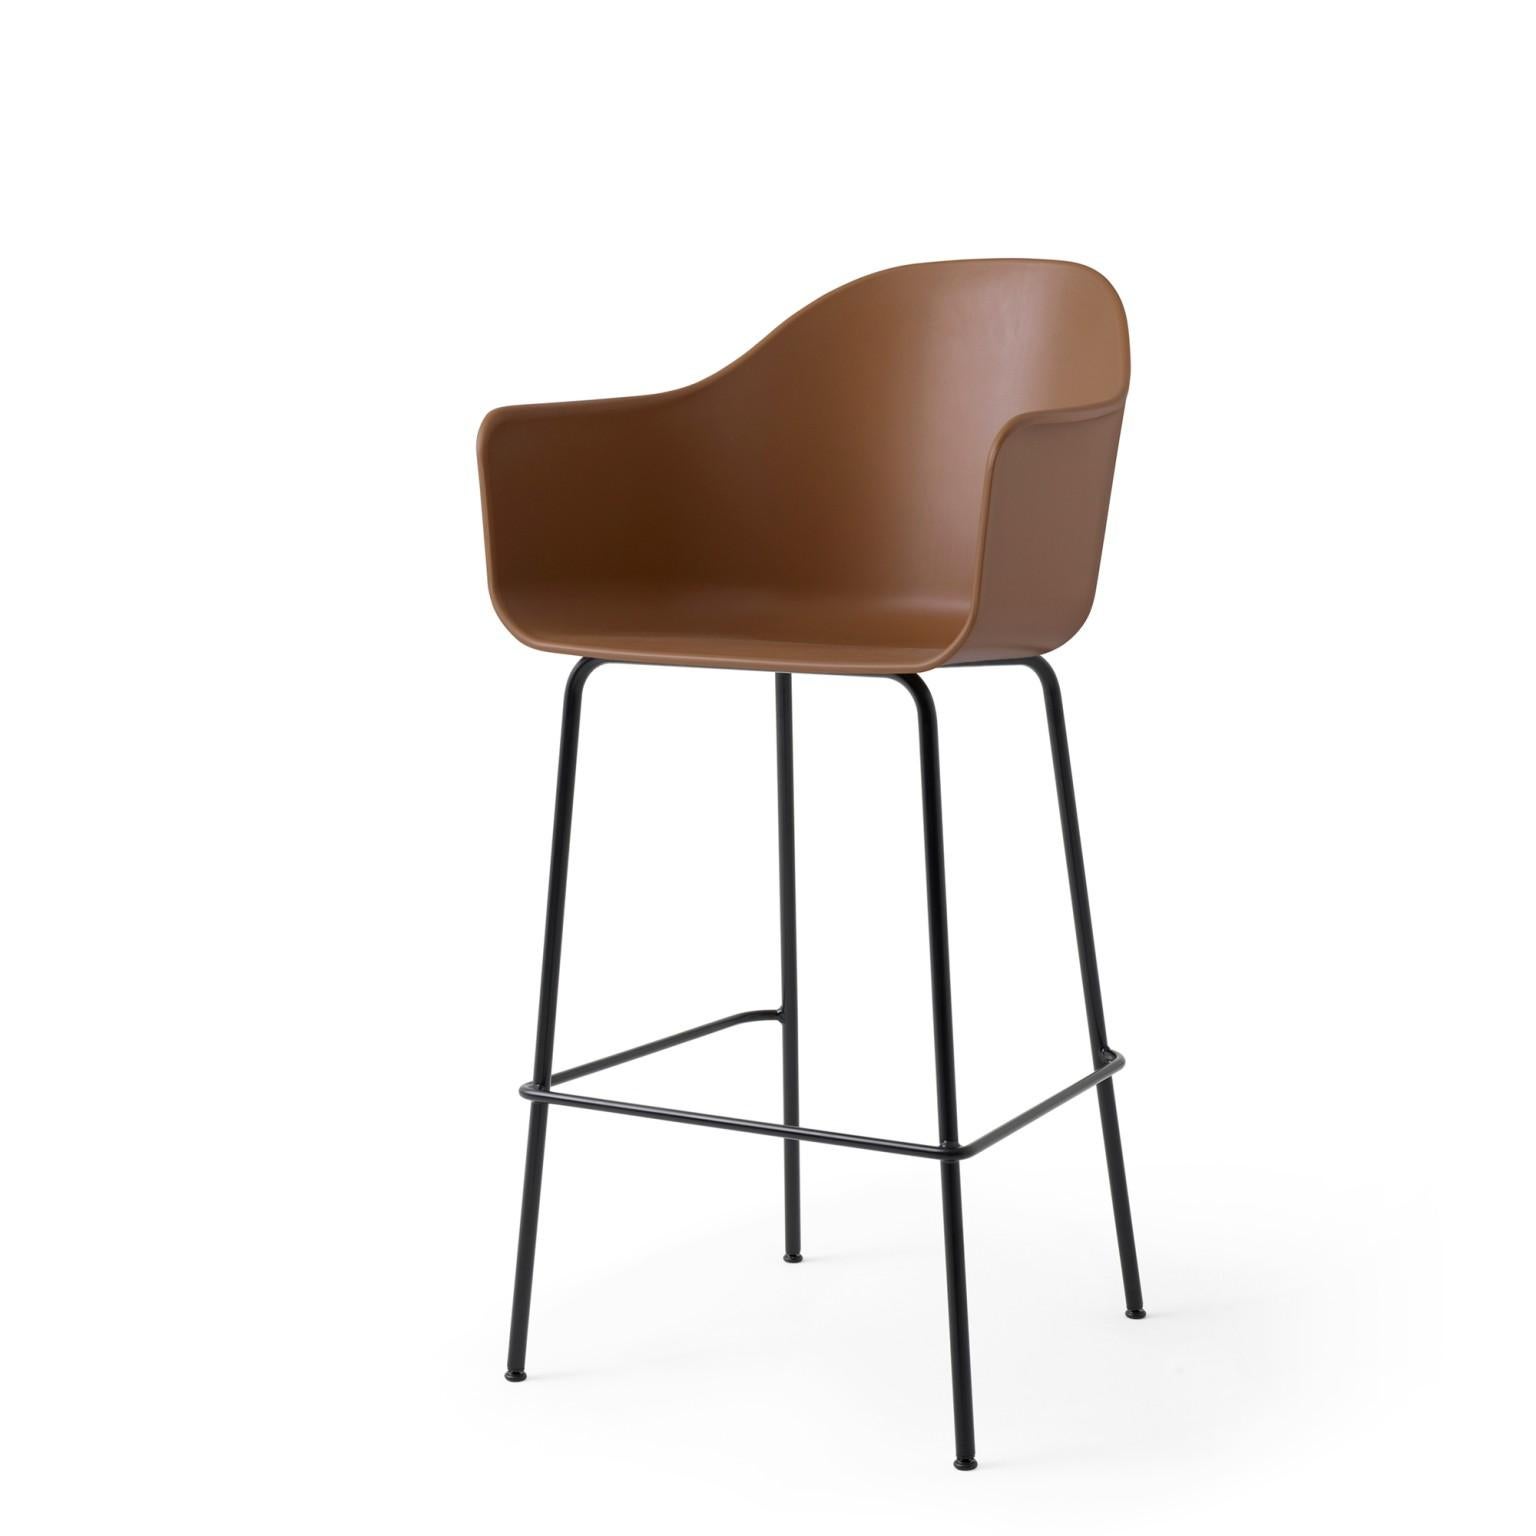 Originally conceived to serve a broad range of needs at menu space, menu’s showroom or creative co-working space or café in Copenhagen, the harbour chair design has expanded to respond to all kinds of demands in private and public spaces. The latest